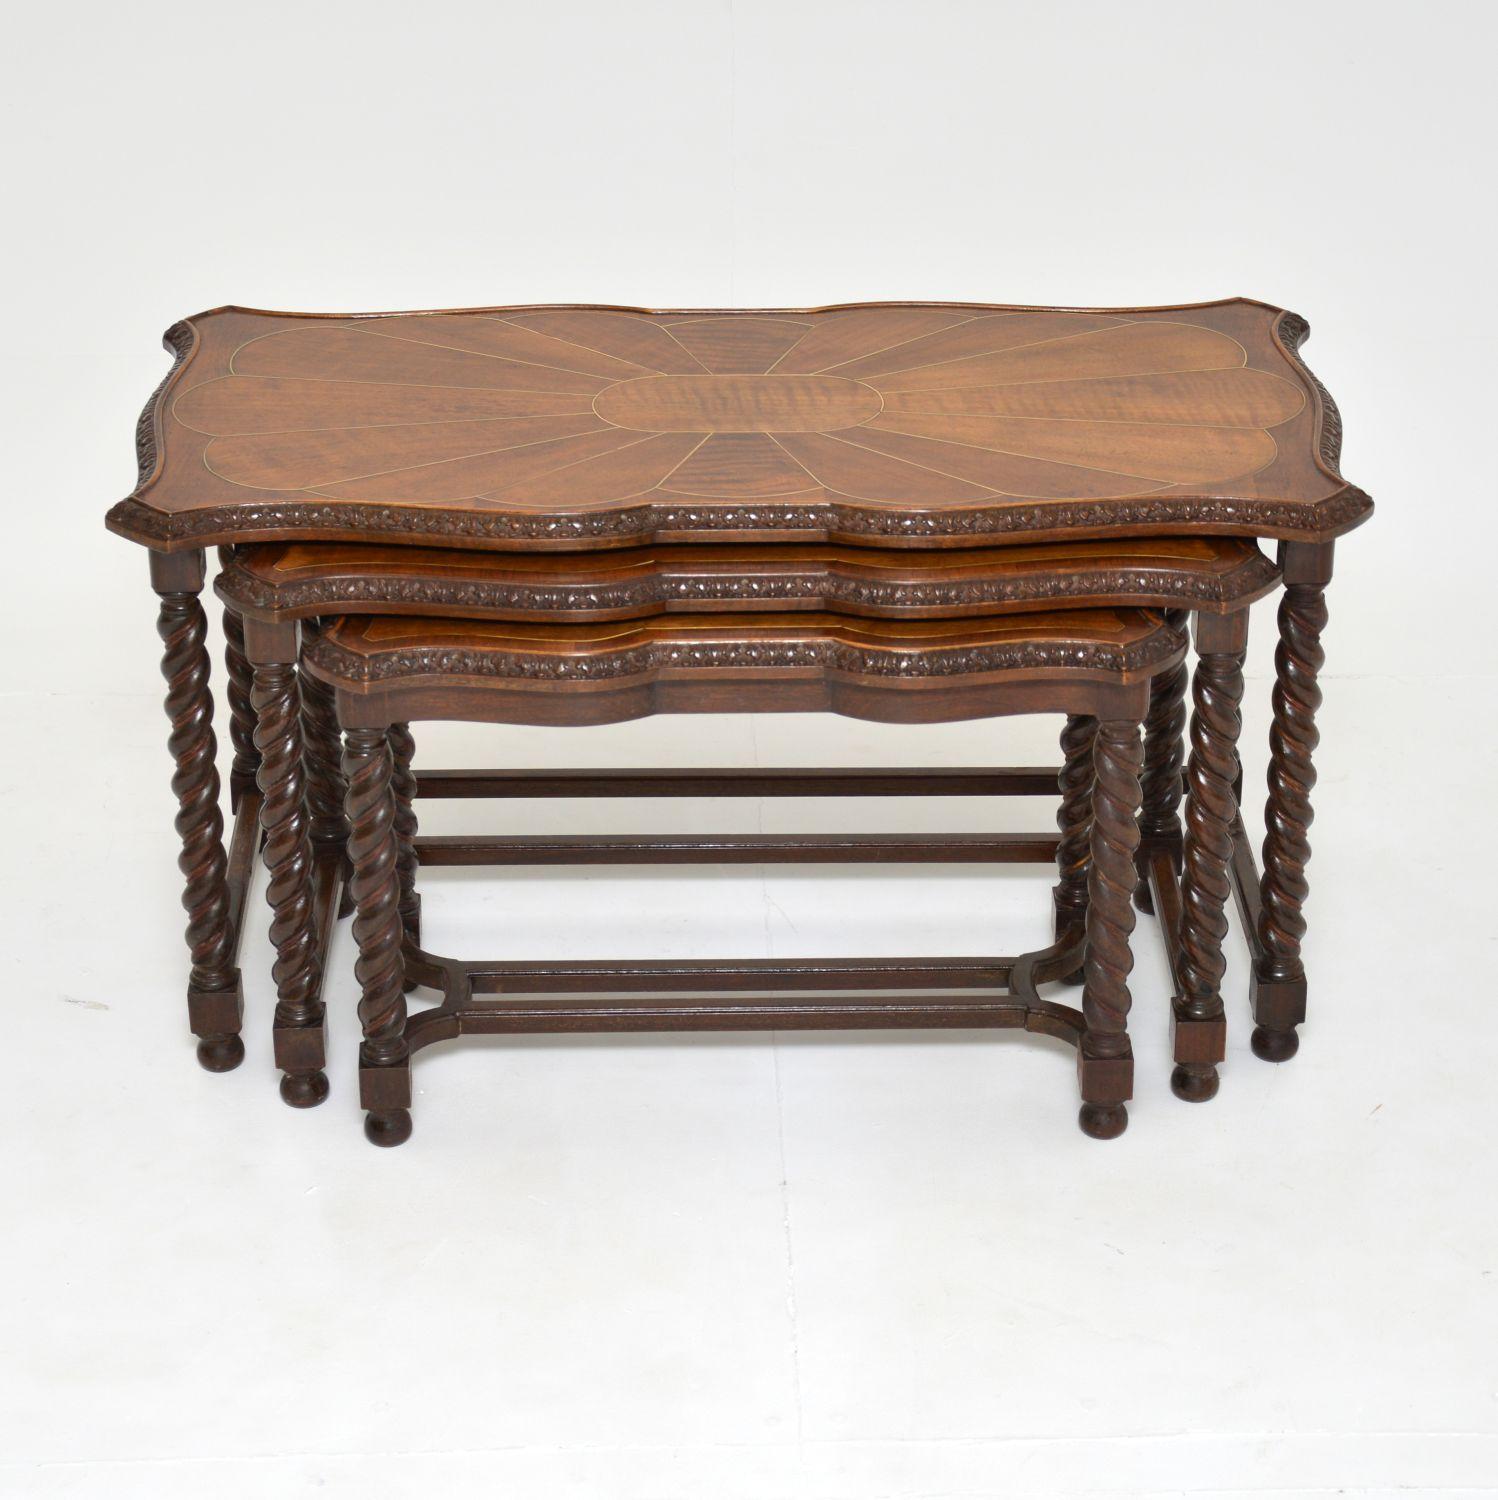 A very unusual and incredibly well made antique nesting coffee table. This was made in England, it dates from around the 1910-20’s.

This has a very useful design, and the quality is amazing. The serpentine shaped edges have crisp and intricate